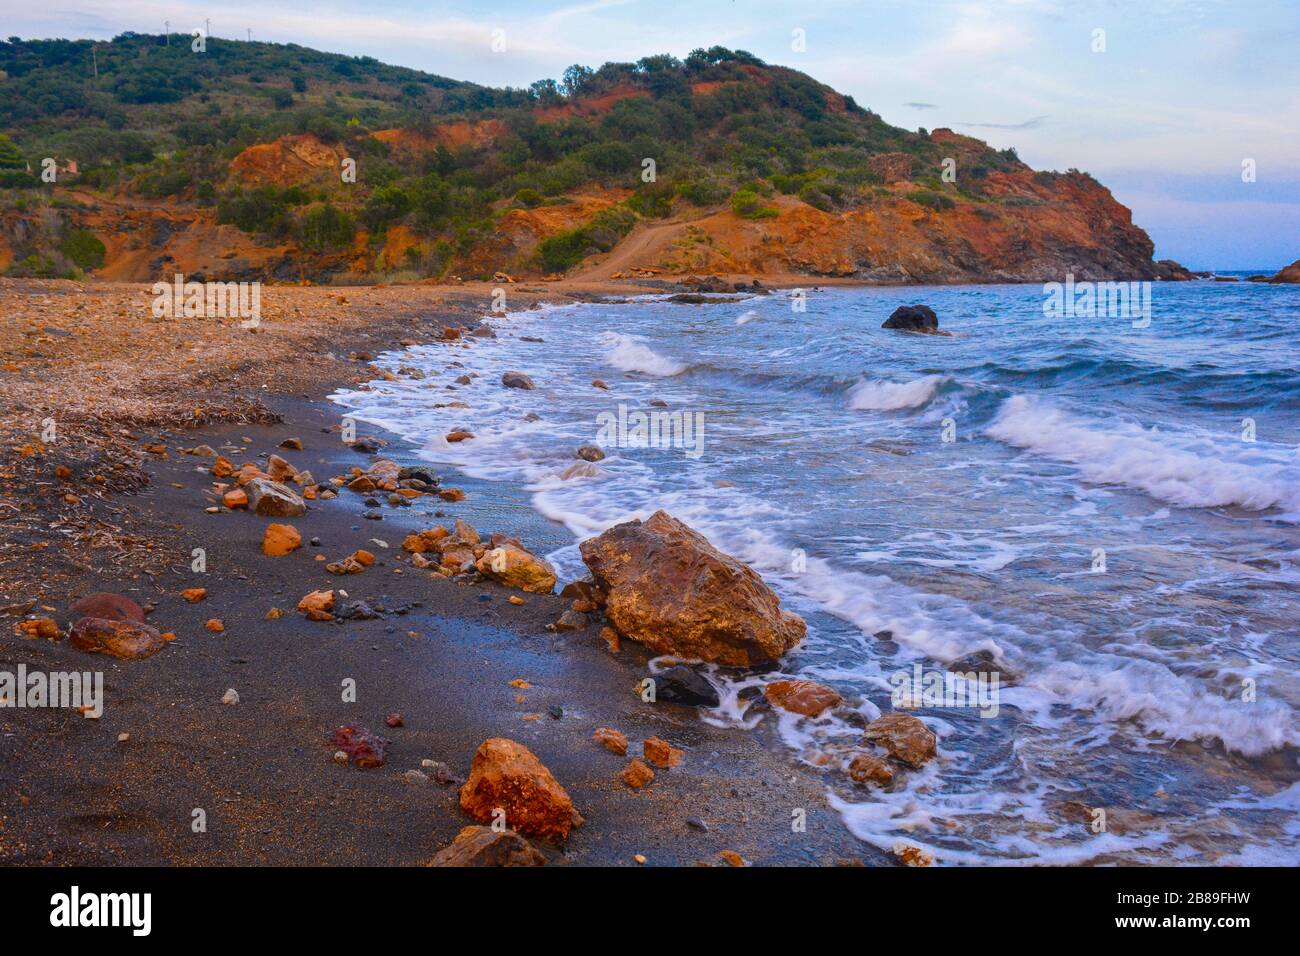 A beautiful rocky coast with color contrast: orange stones and vulcanic black sand. Strong sea waves and little hill with pine trees in the back. Stock Photo